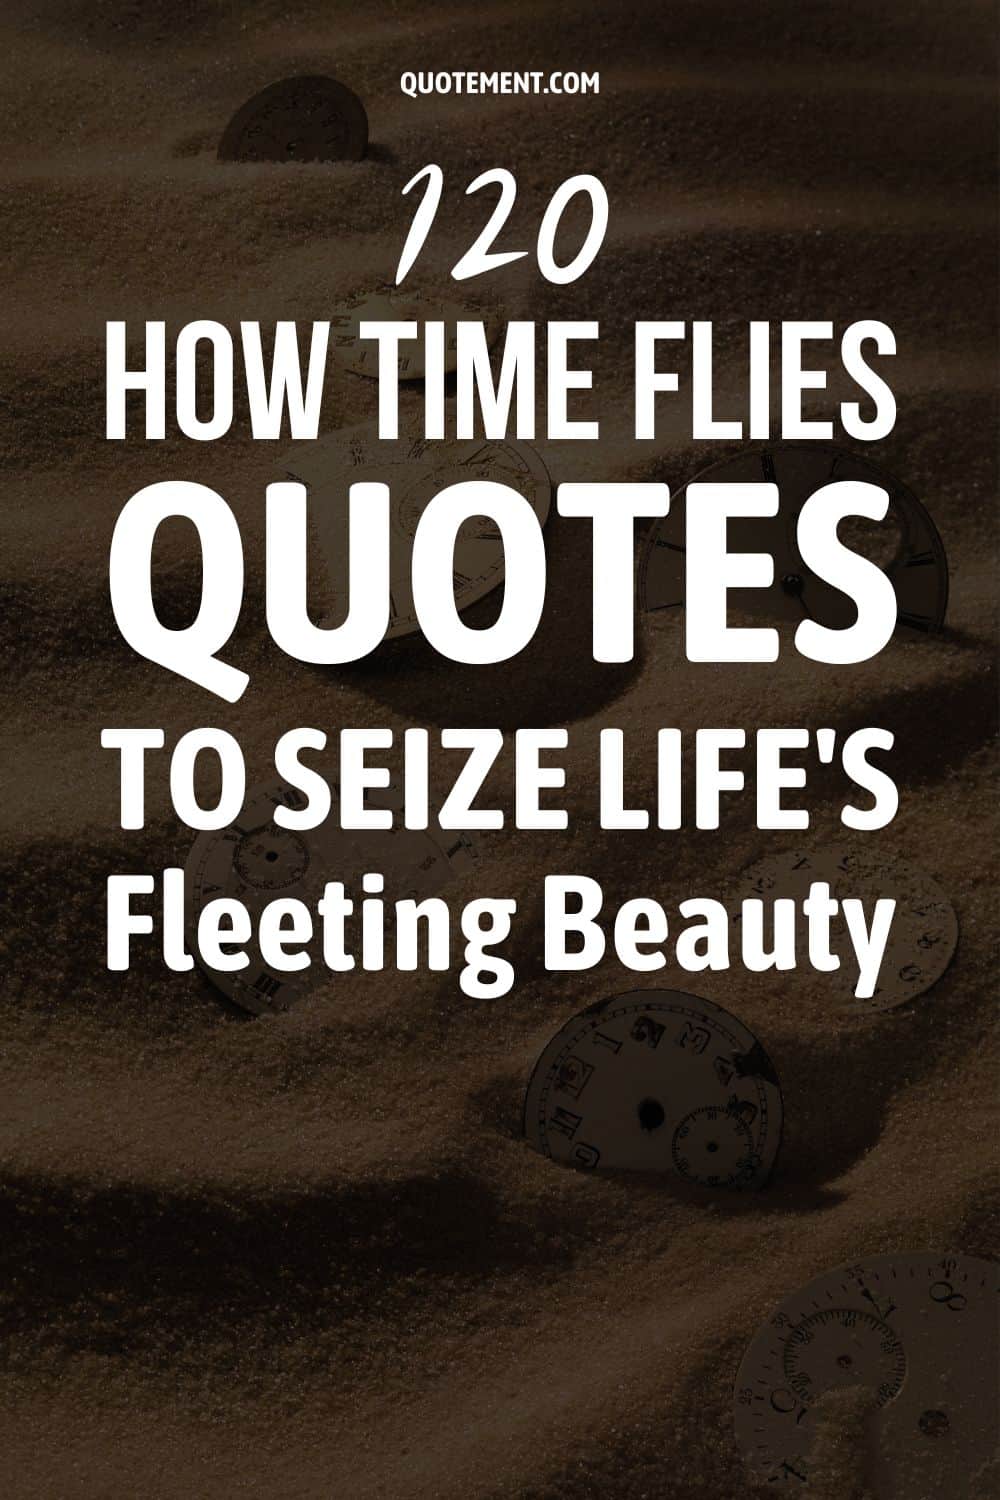 120 How Time Flies Quotes To Seize Life's Fleeting Beauty
